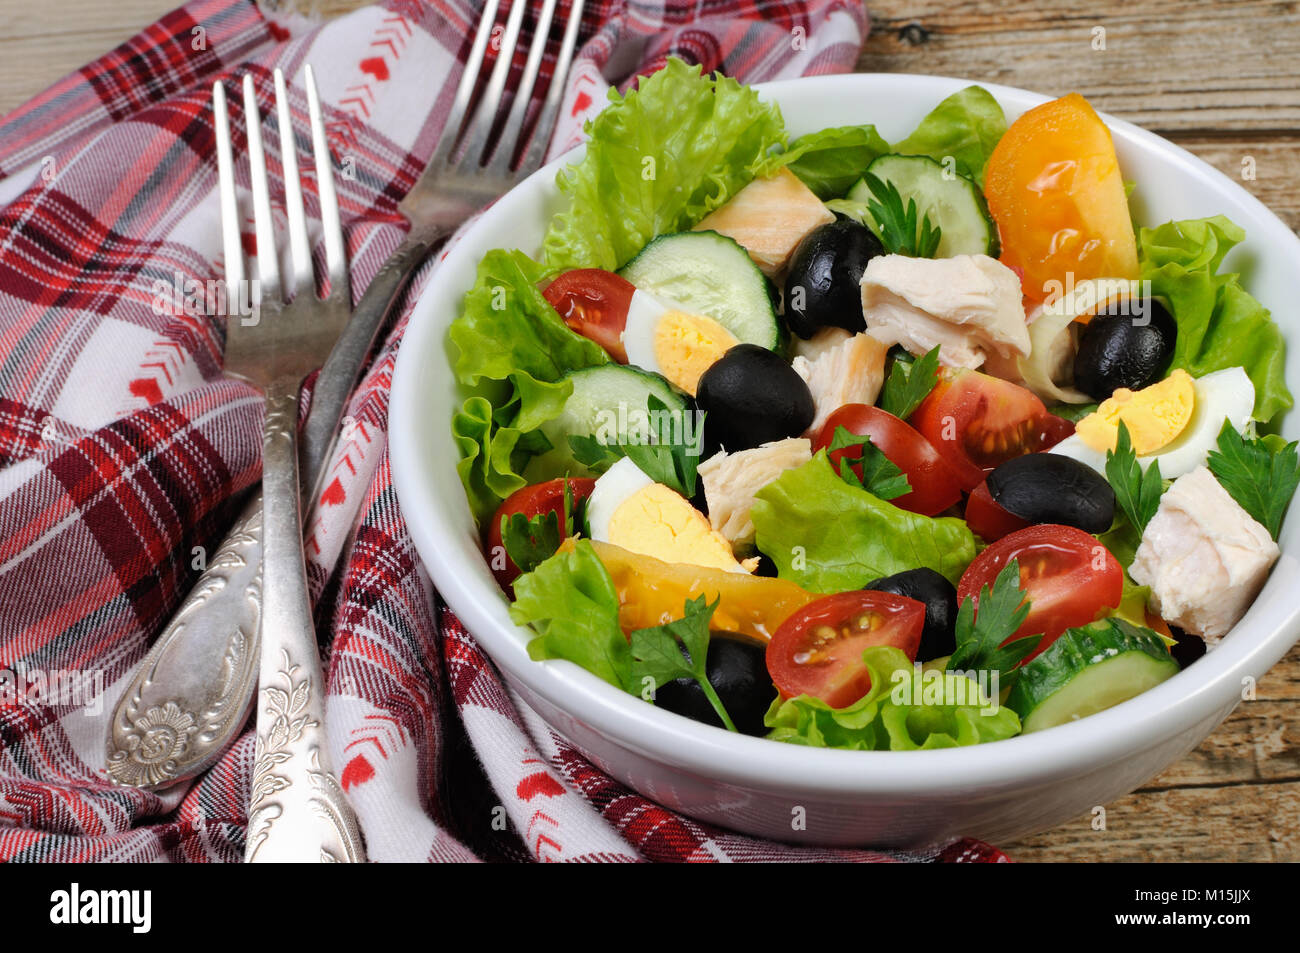 Vegetable salad with chicken and eggs, olives in lettuce leaves. Horizontal shot. Stock Photo